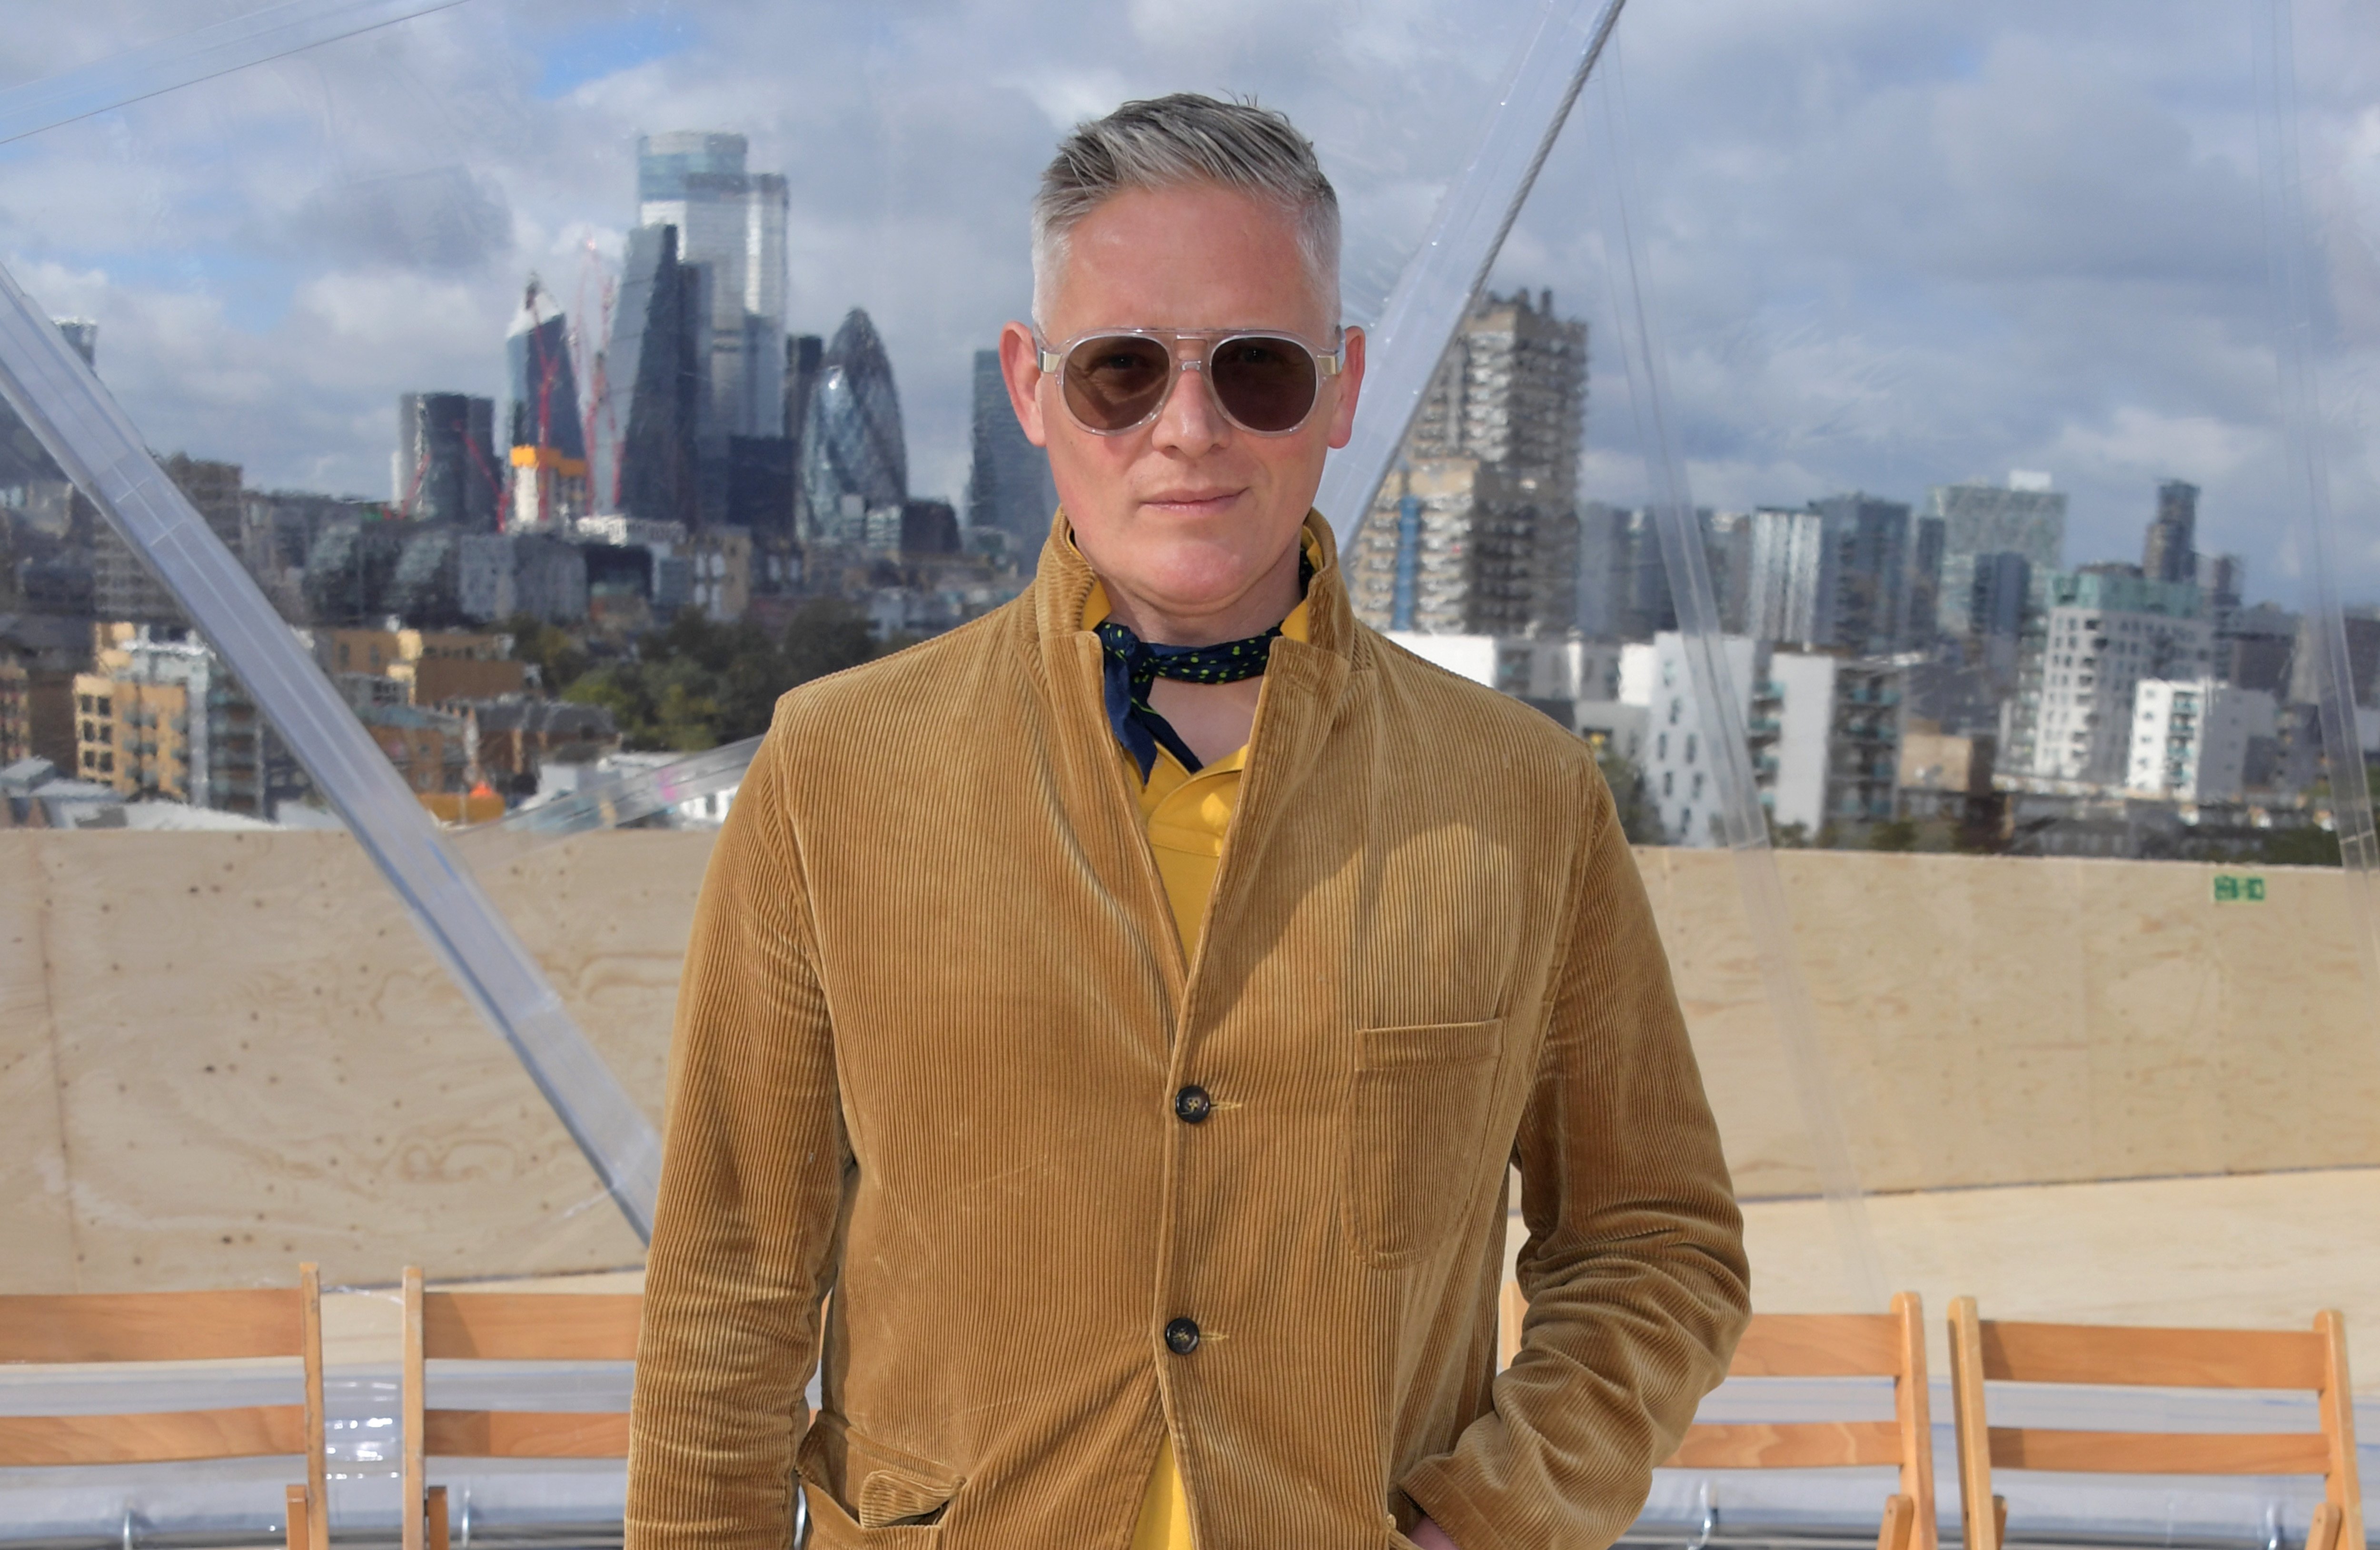 Giles Deacon attends the Alexander McQueen SS22 Womenswear show in London | Source: Getty Images